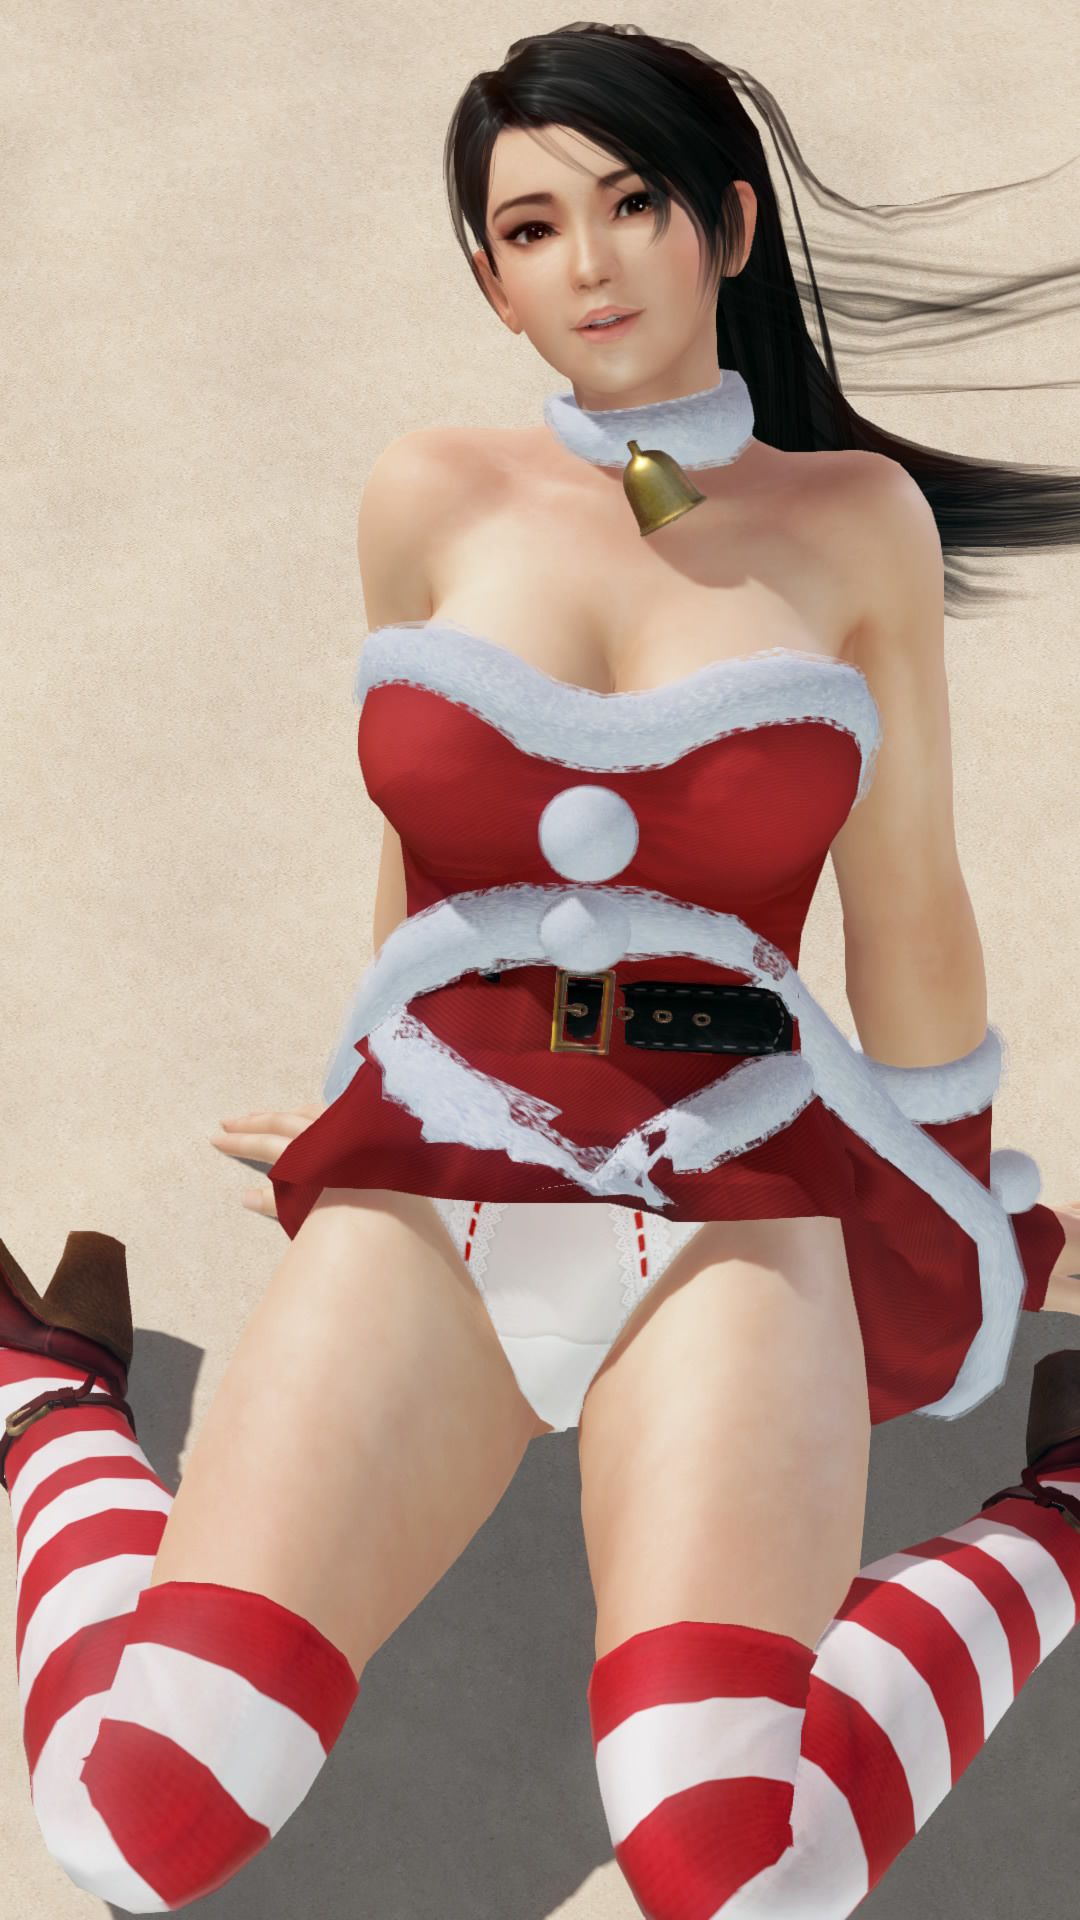 Merry Xmas from DOAX3 South Island! Photo session with new swimsuit Santa 10